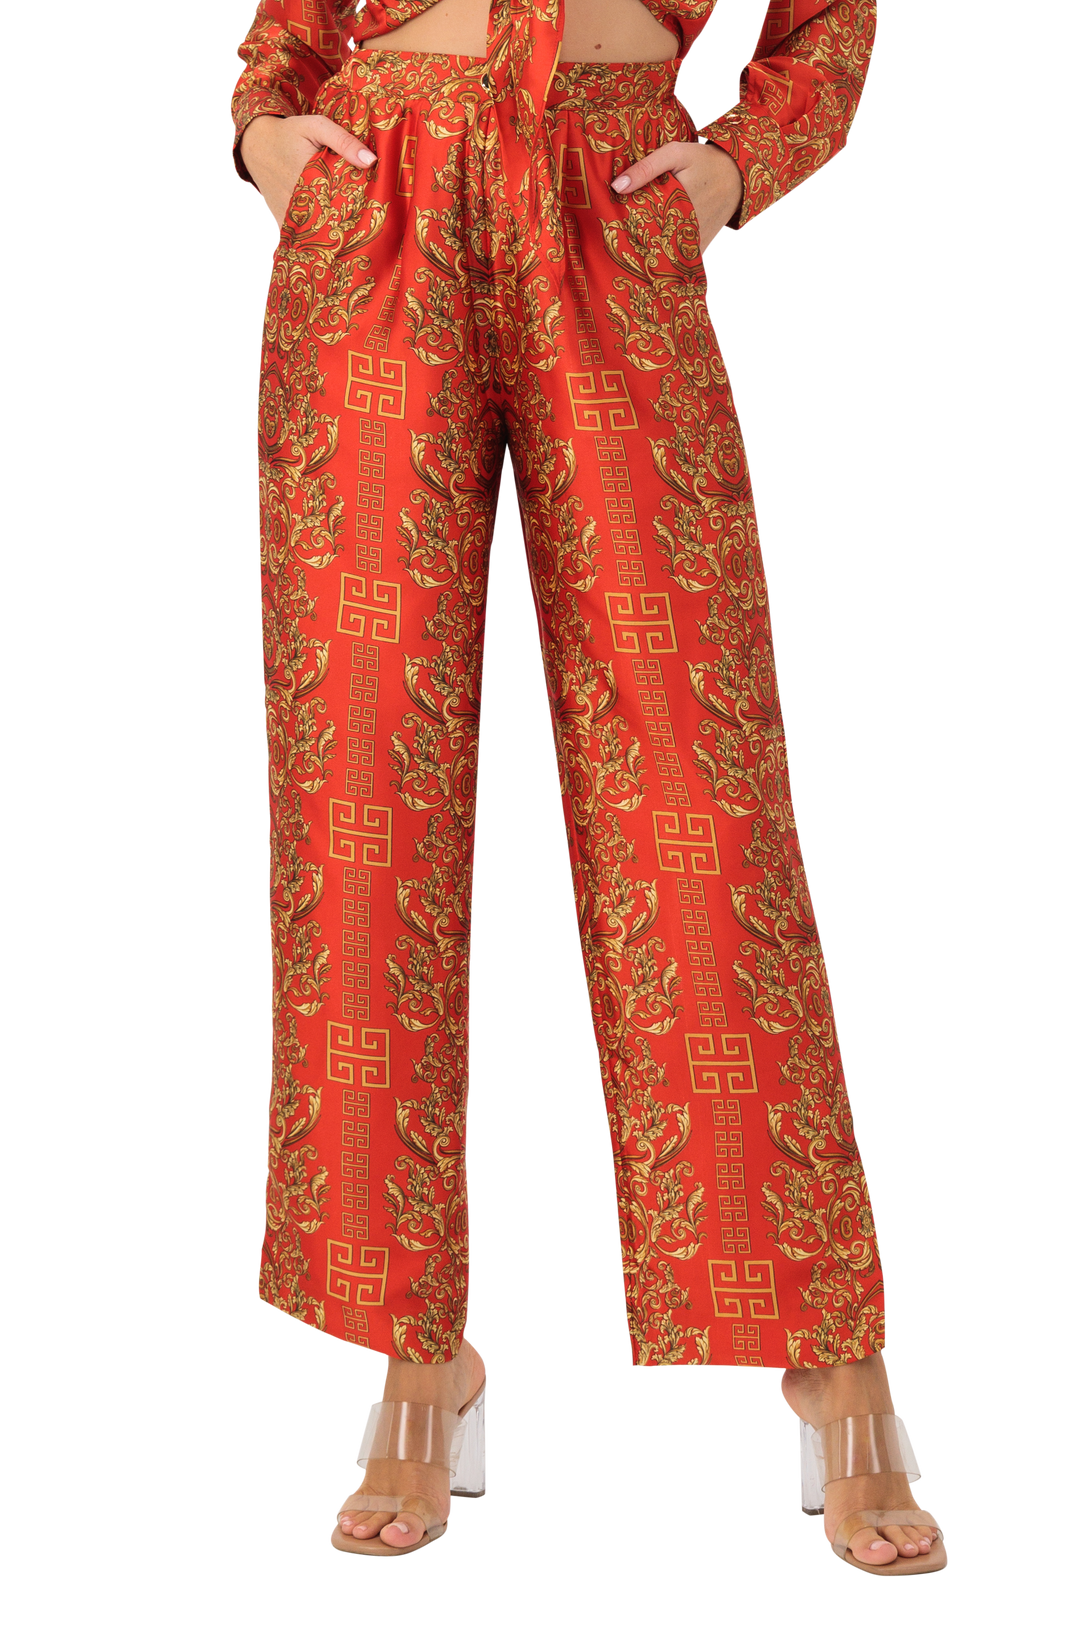 Pants high west silky